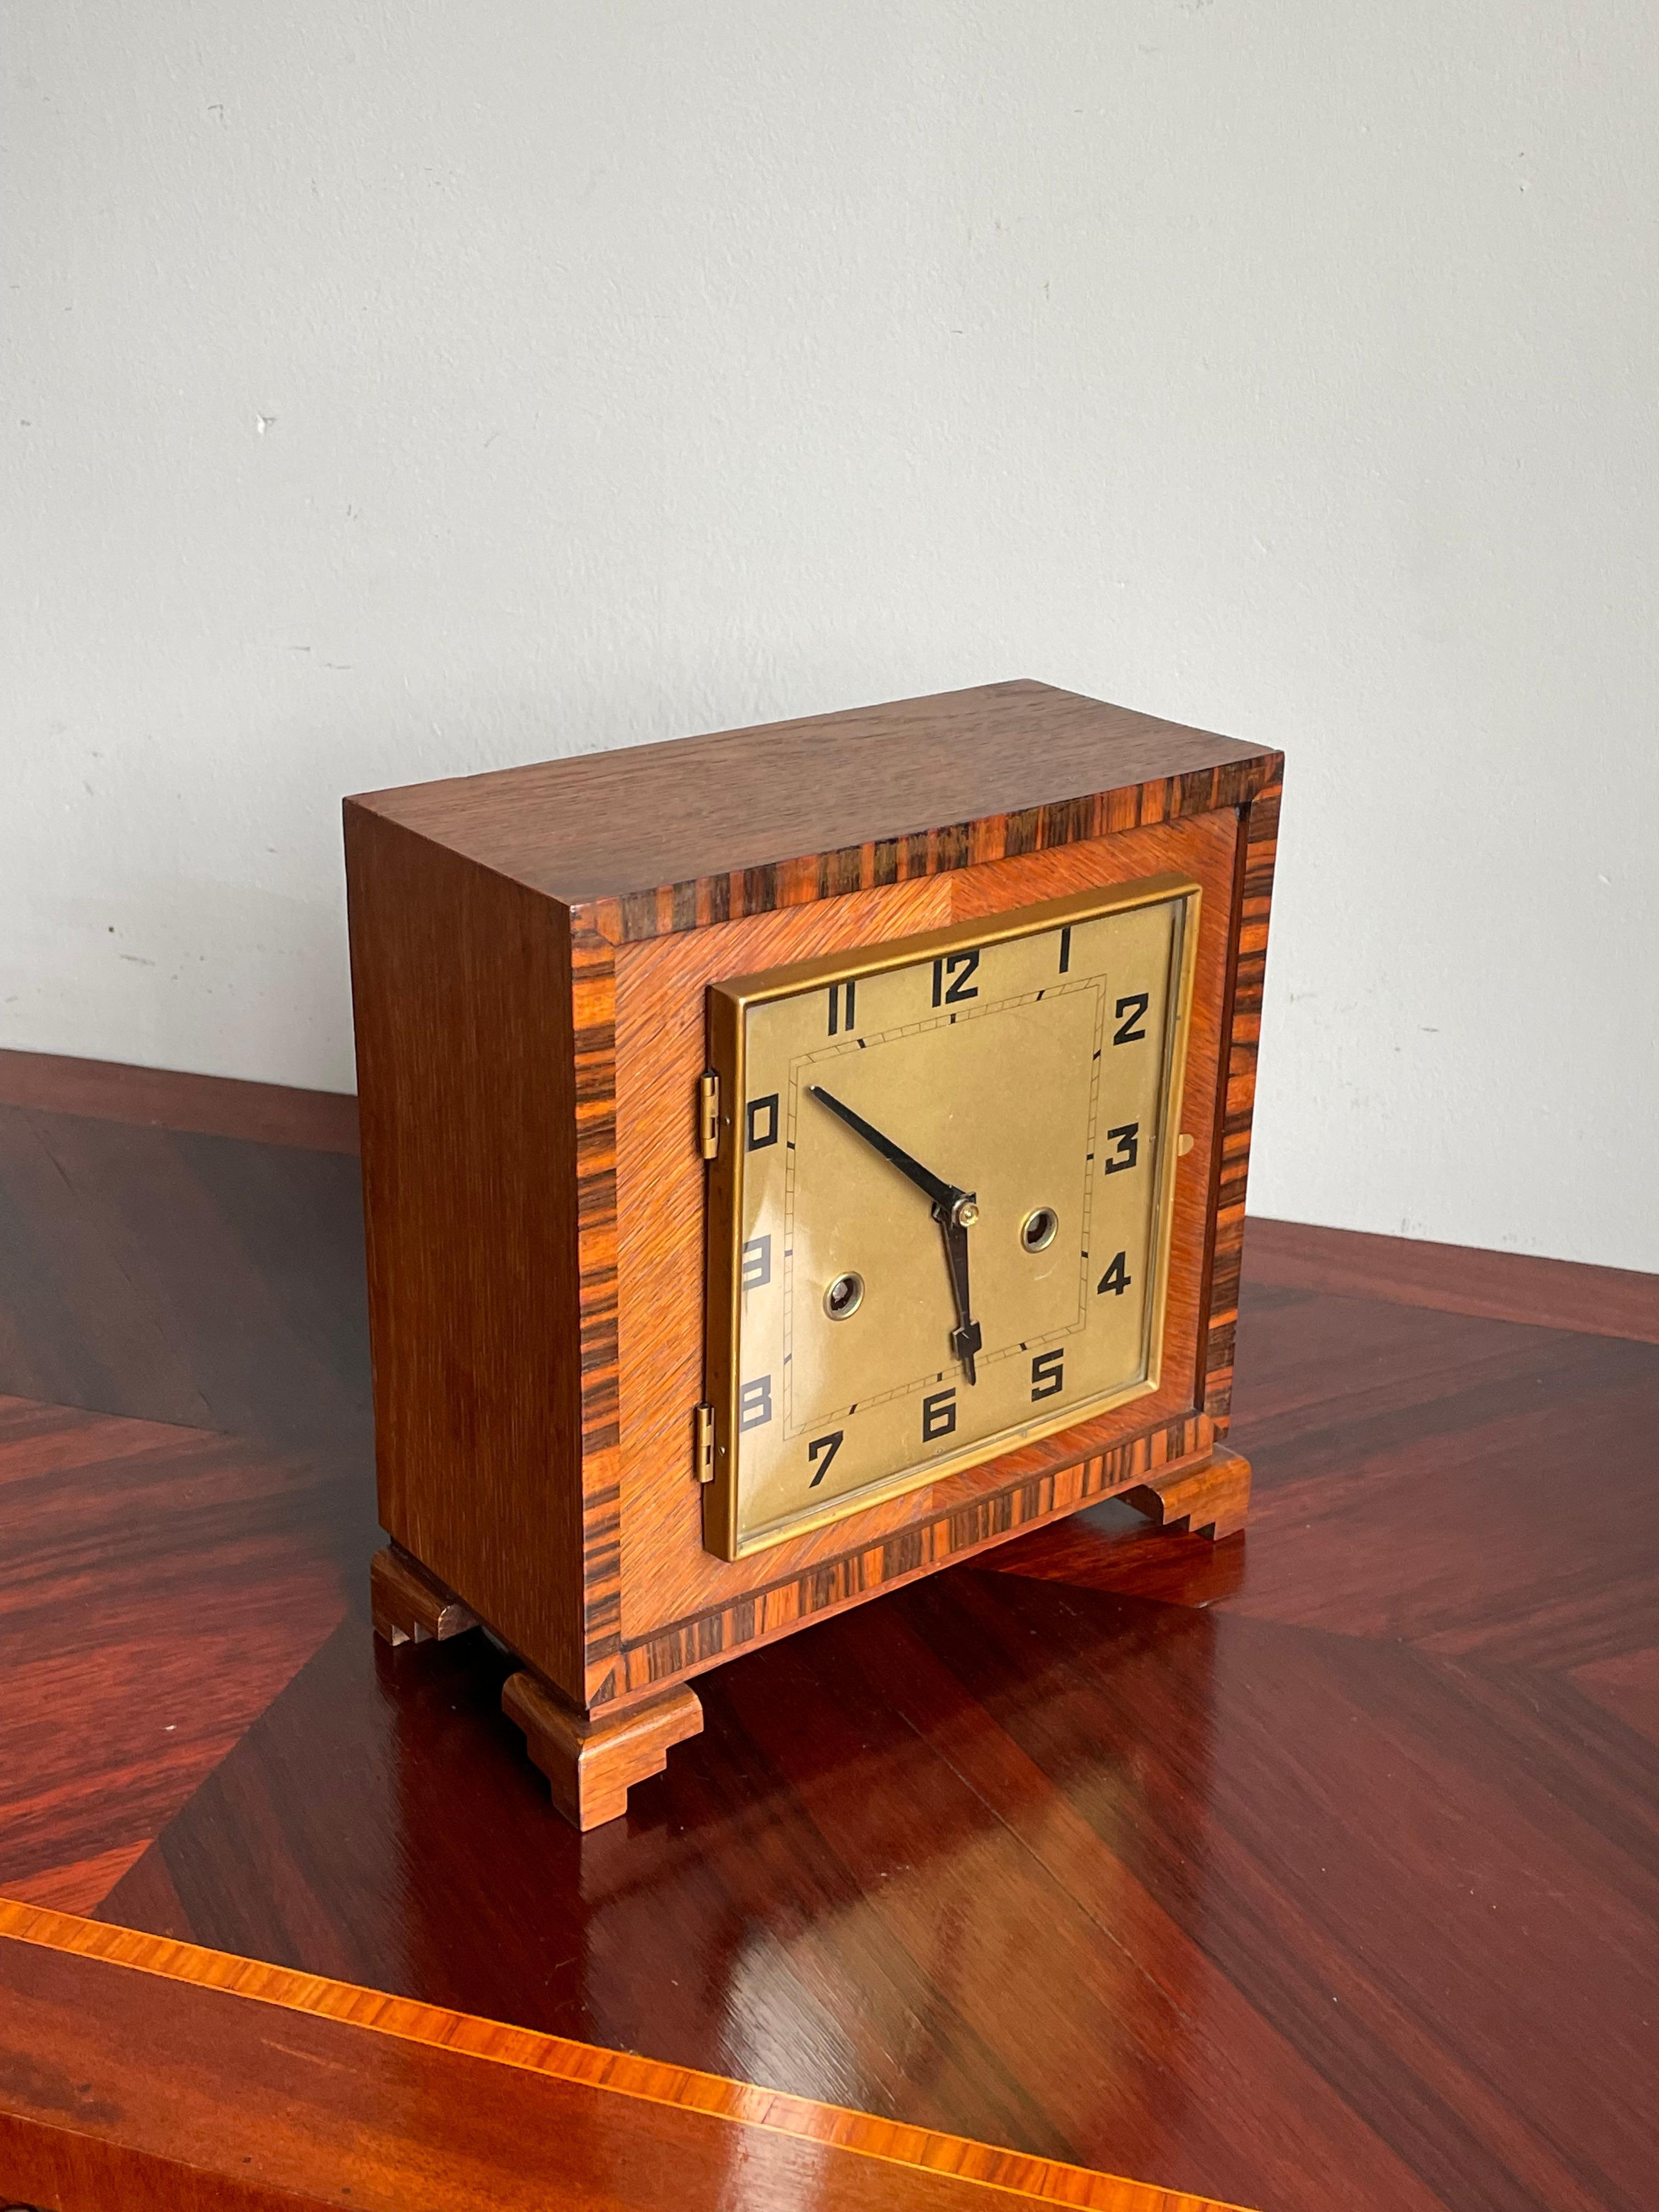 Early 20th century, great condition Art Deco mantel / table / desk clock.

A few years ago we sold an Amsterdam School wall clock that was undoubtedly by the same maker as this wonderful design Art Deco table clock. To have found this stunning